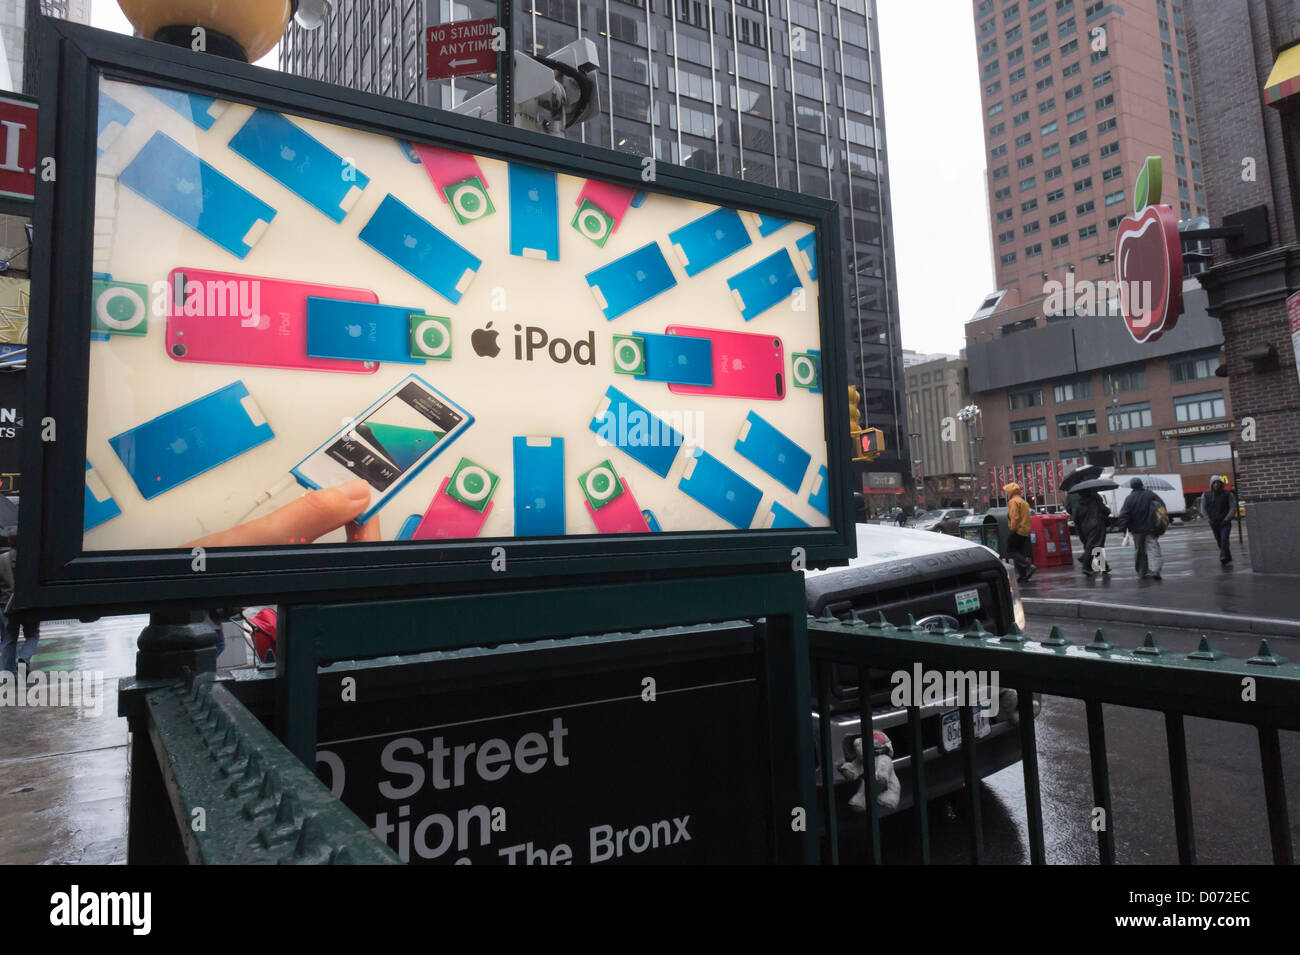 Advertising for the Apple's line of iPods on a subway kiosk in New York on Tuesday, November 12, 2012. (© Richard B. Levine) Stock Photo